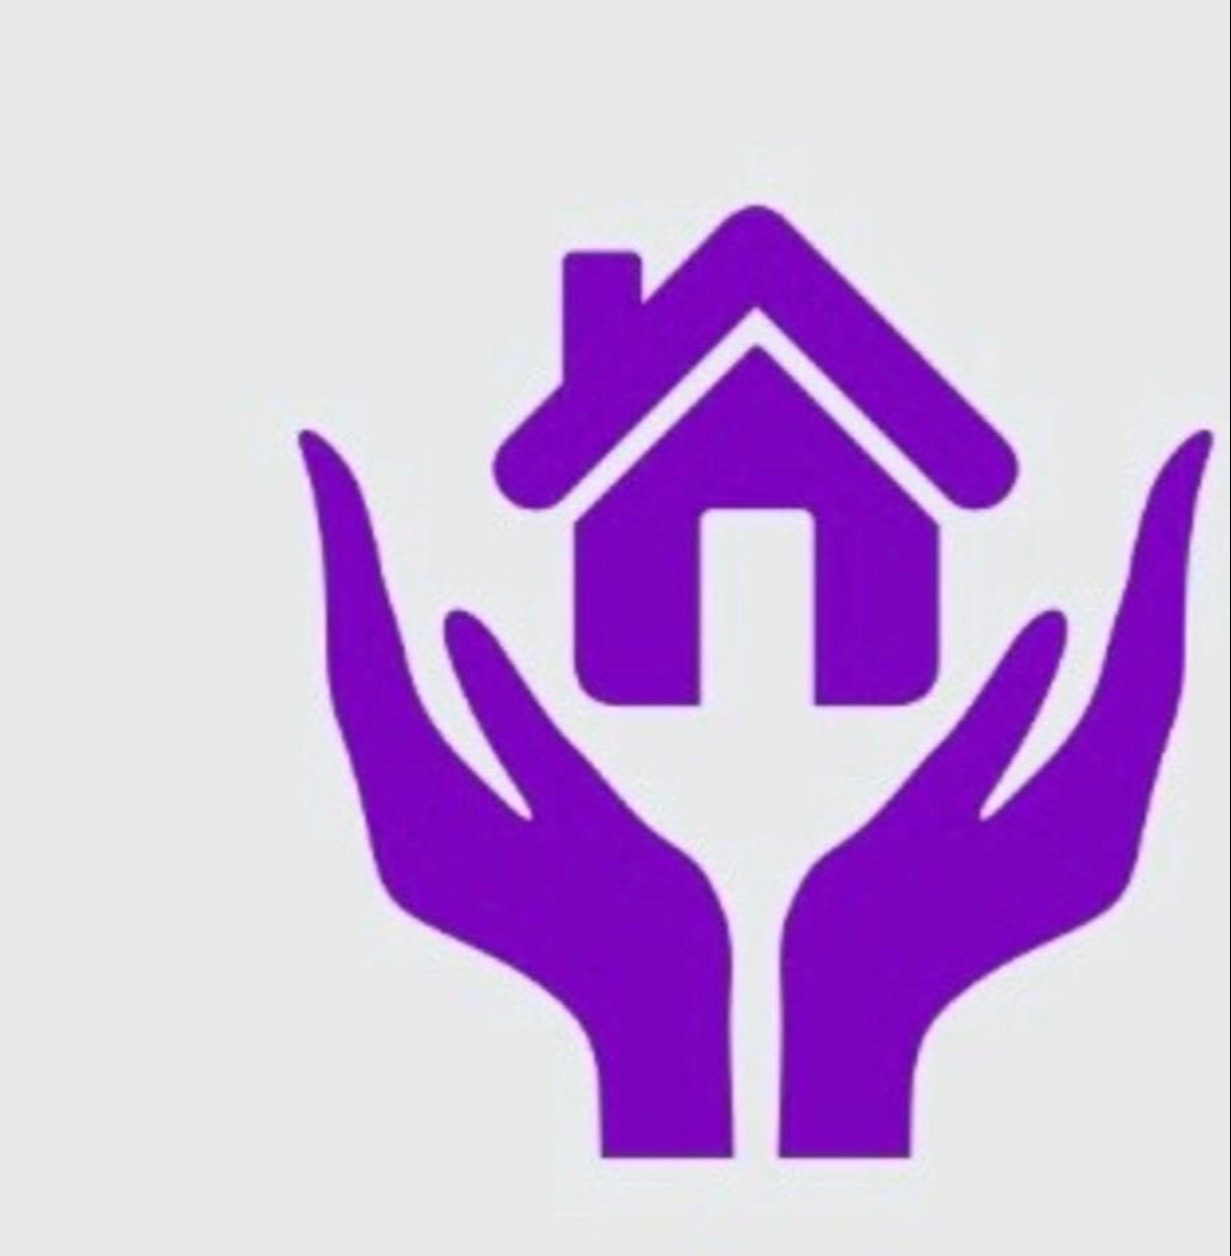 Helping hands adult day care center logo